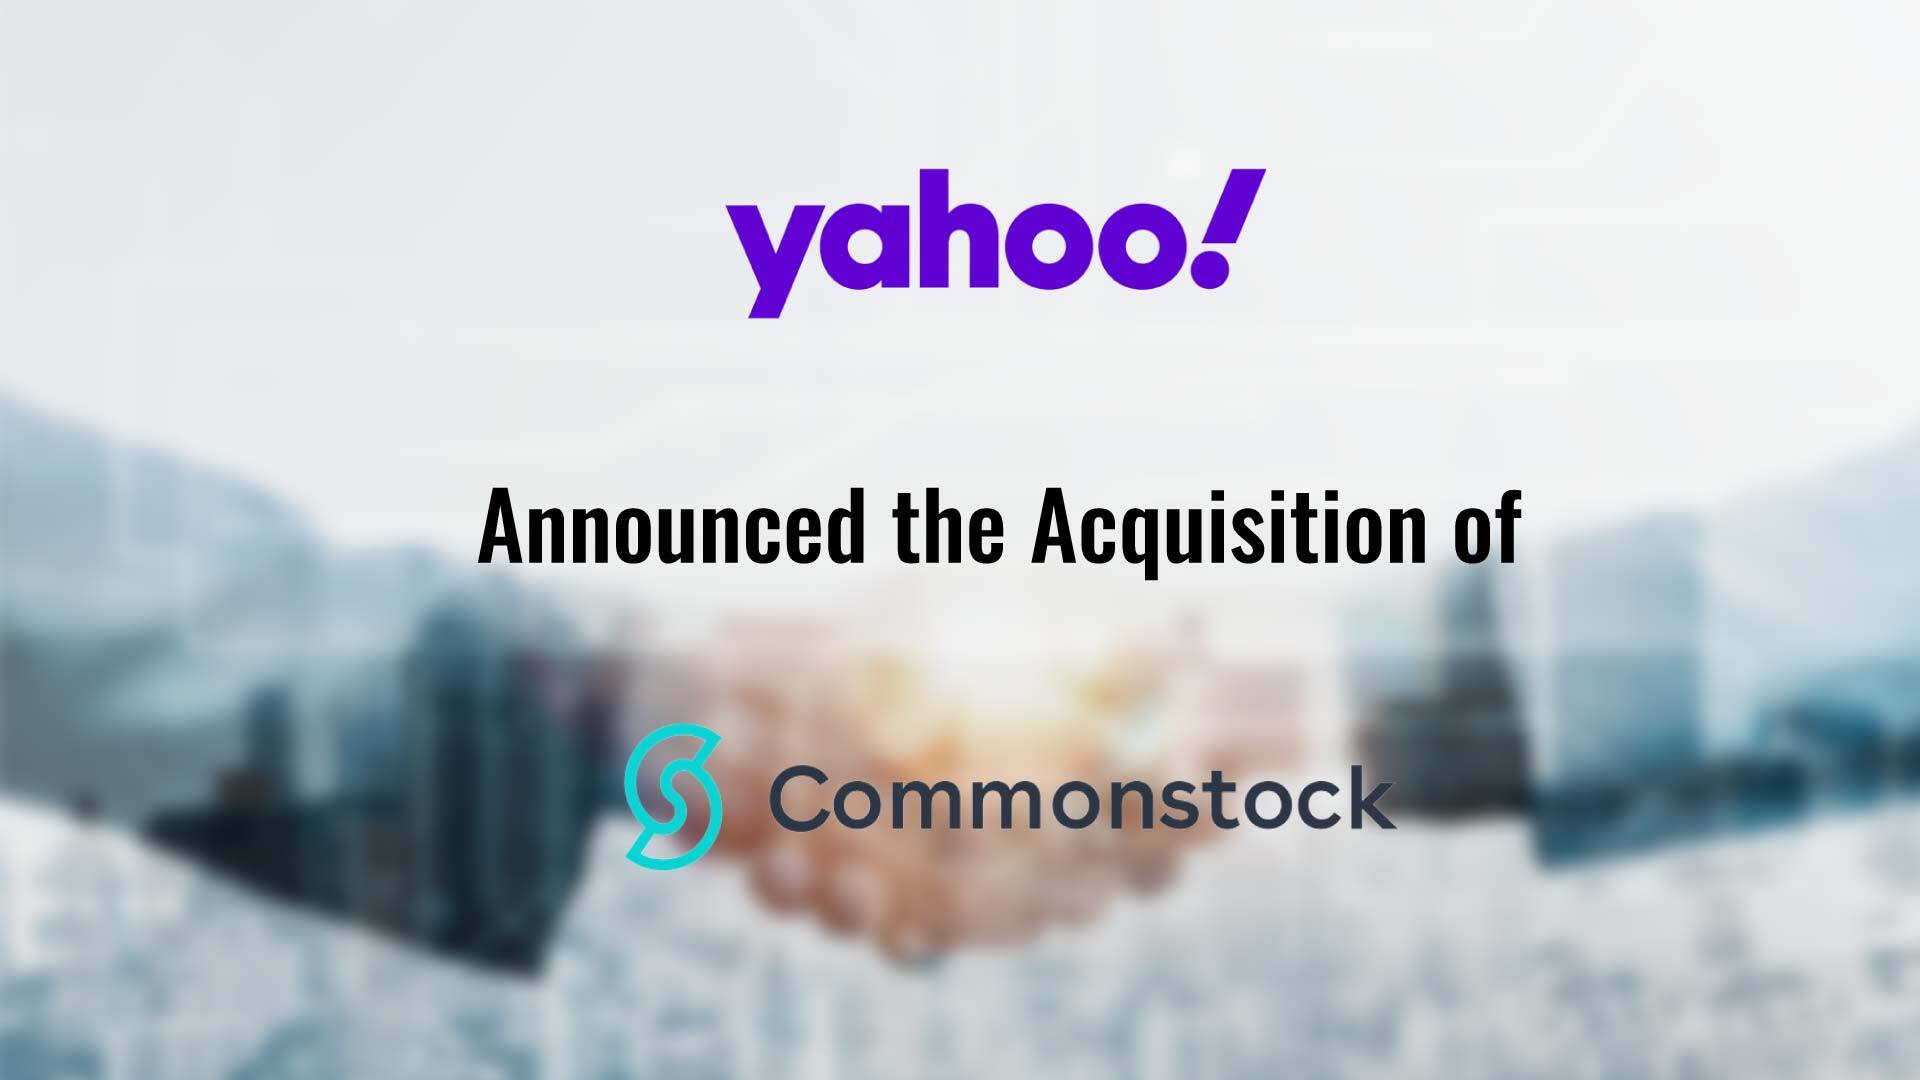 Yahoo Acquires Commonstock to Expand Community, Deepen Insights For Yahoo Finance Users